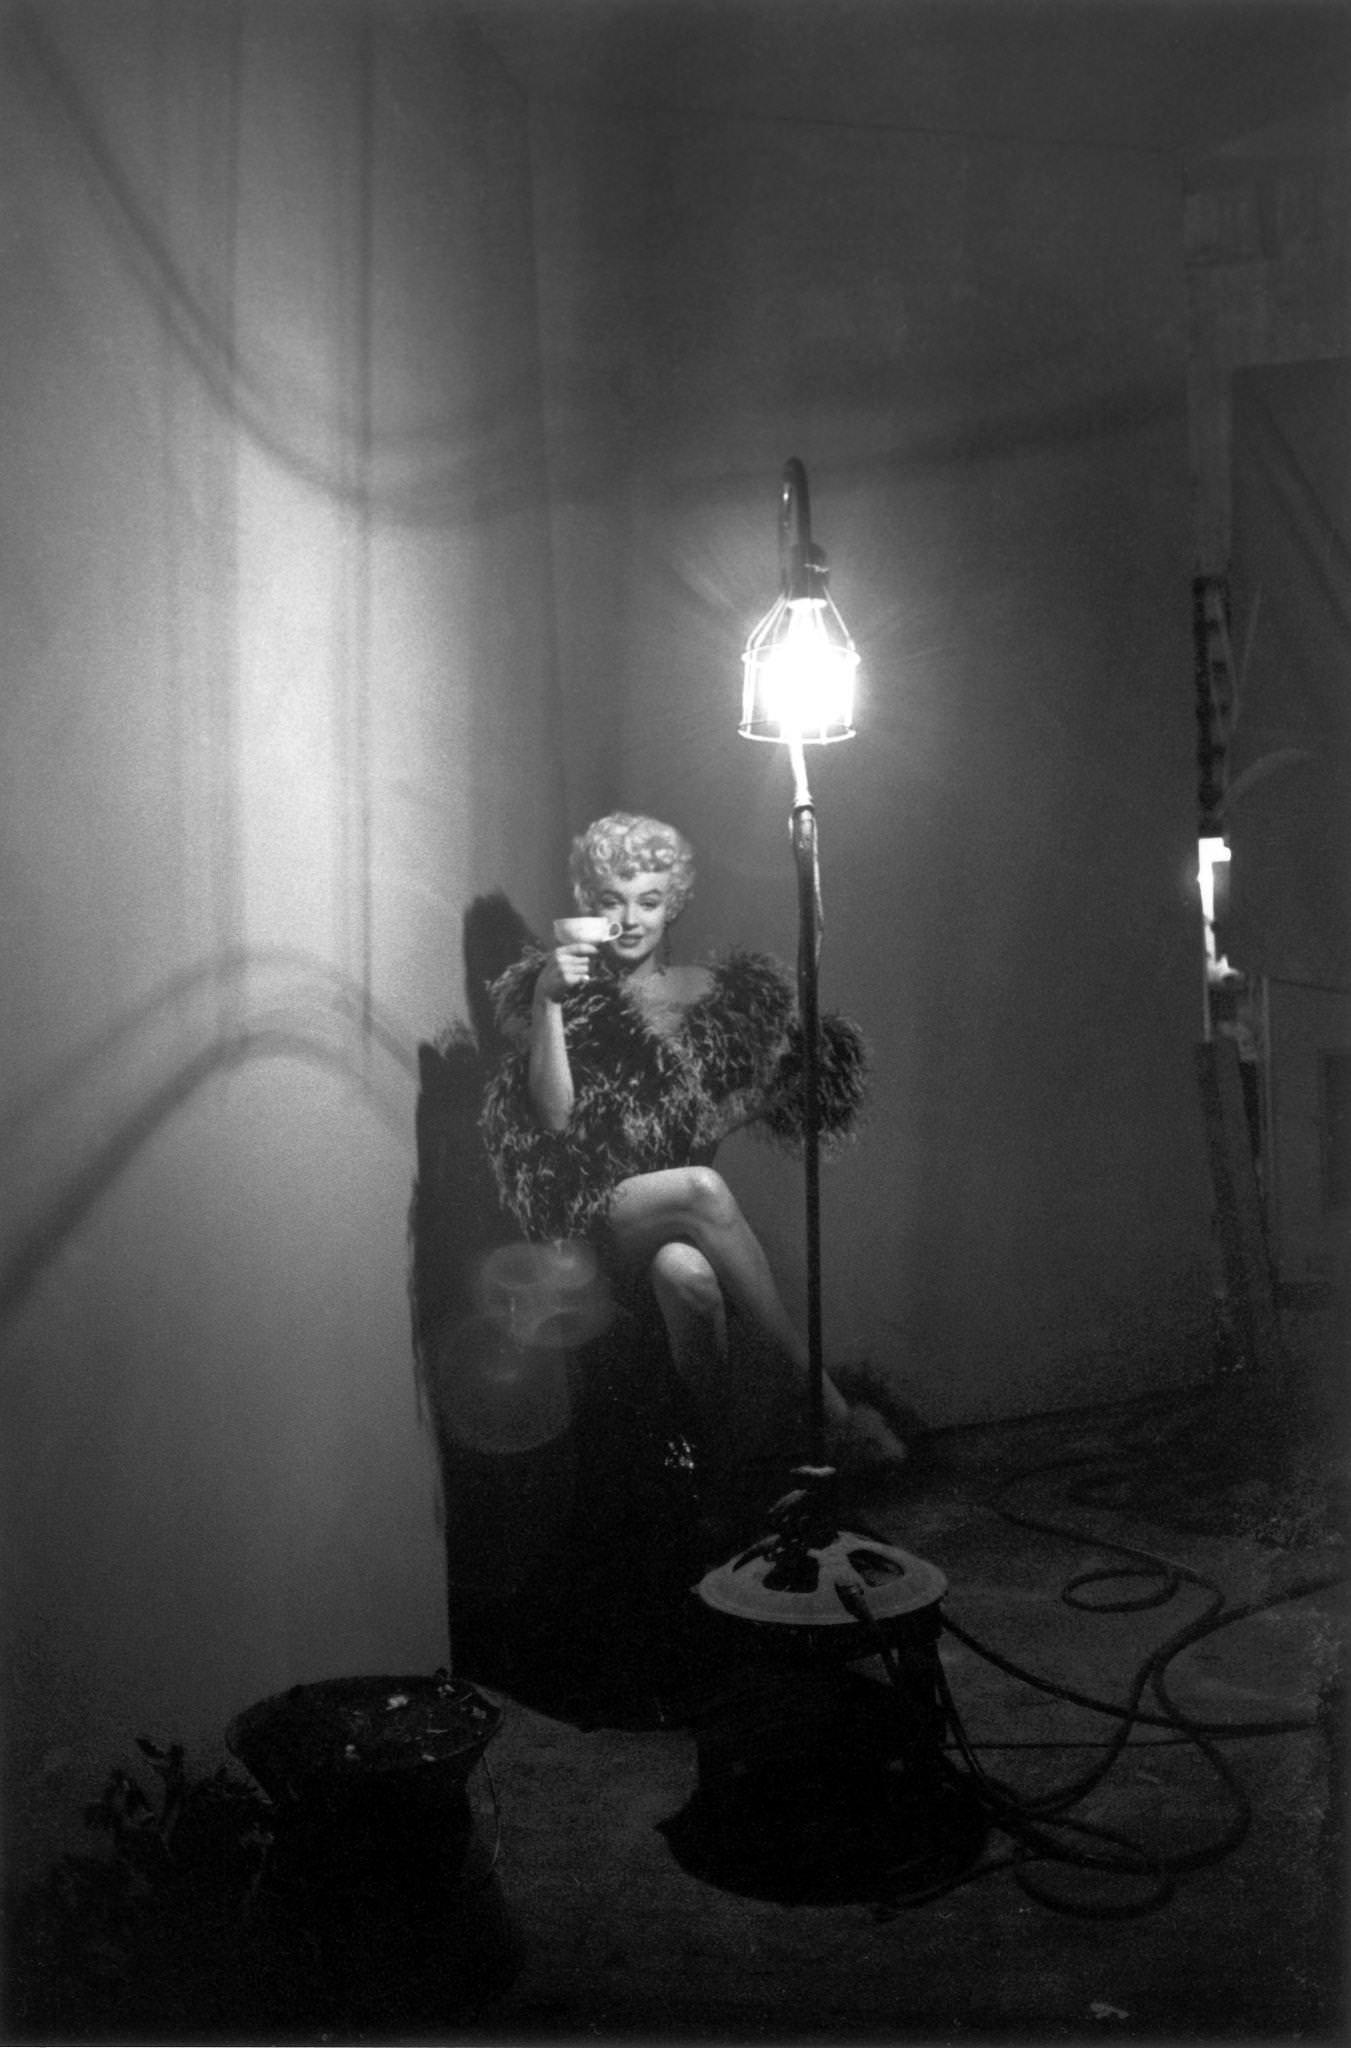 Marilyn Monroe in a feather boa holding a teacup as she sits next to a tall floor lamp in 1954 during the filming of "The Seven Year Itch" in Los Angeles